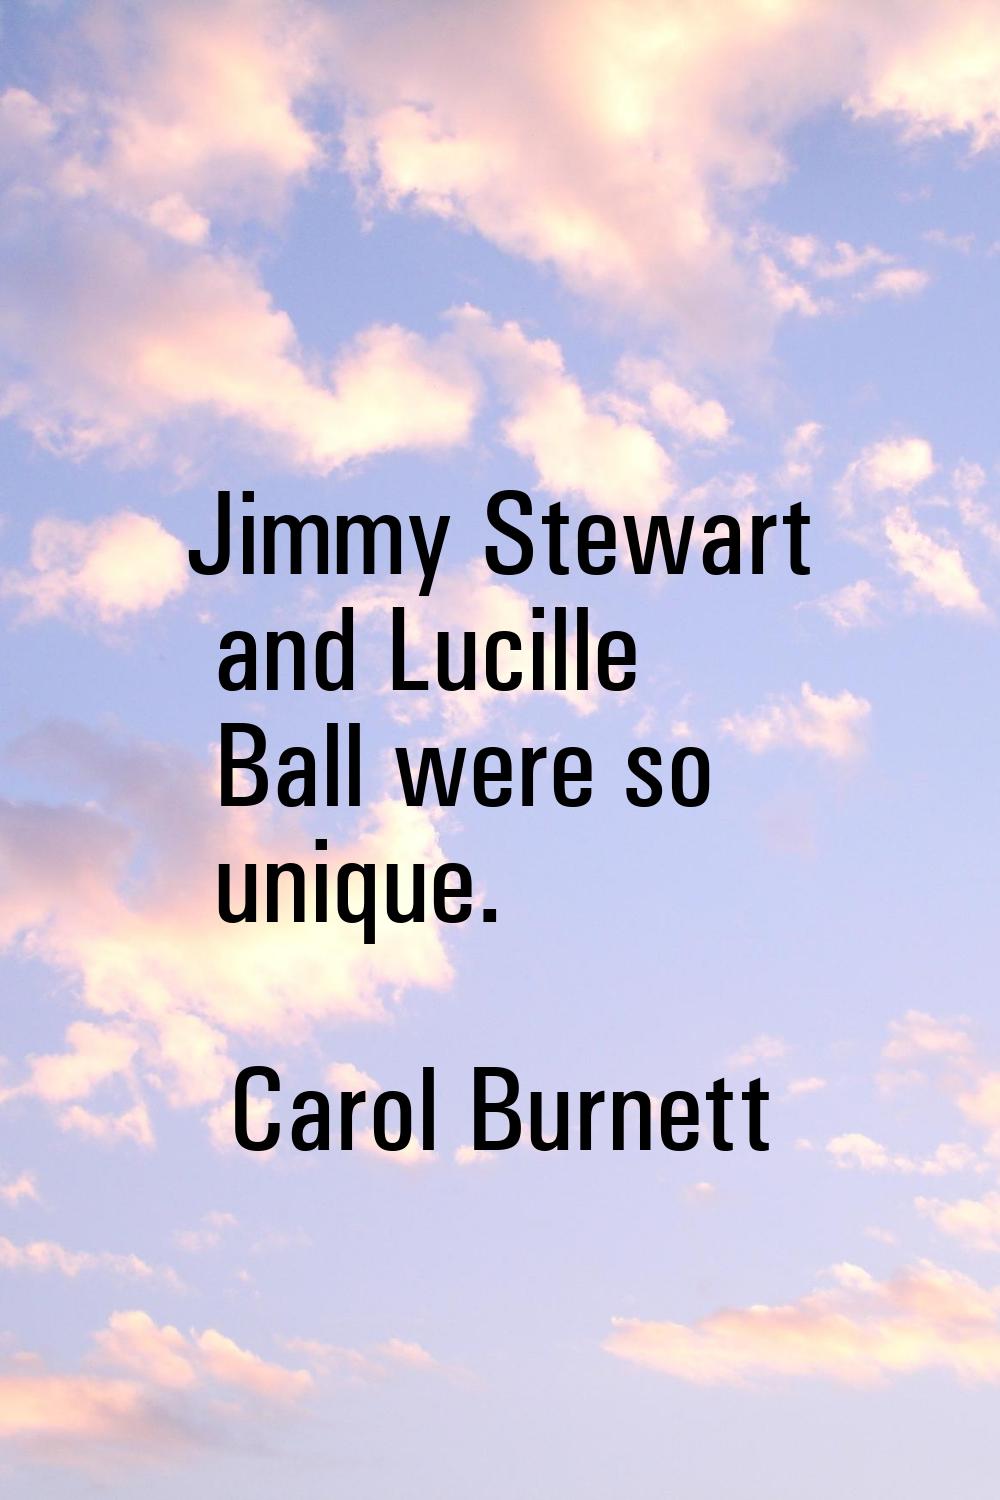 Jimmy Stewart and Lucille Ball were so unique.